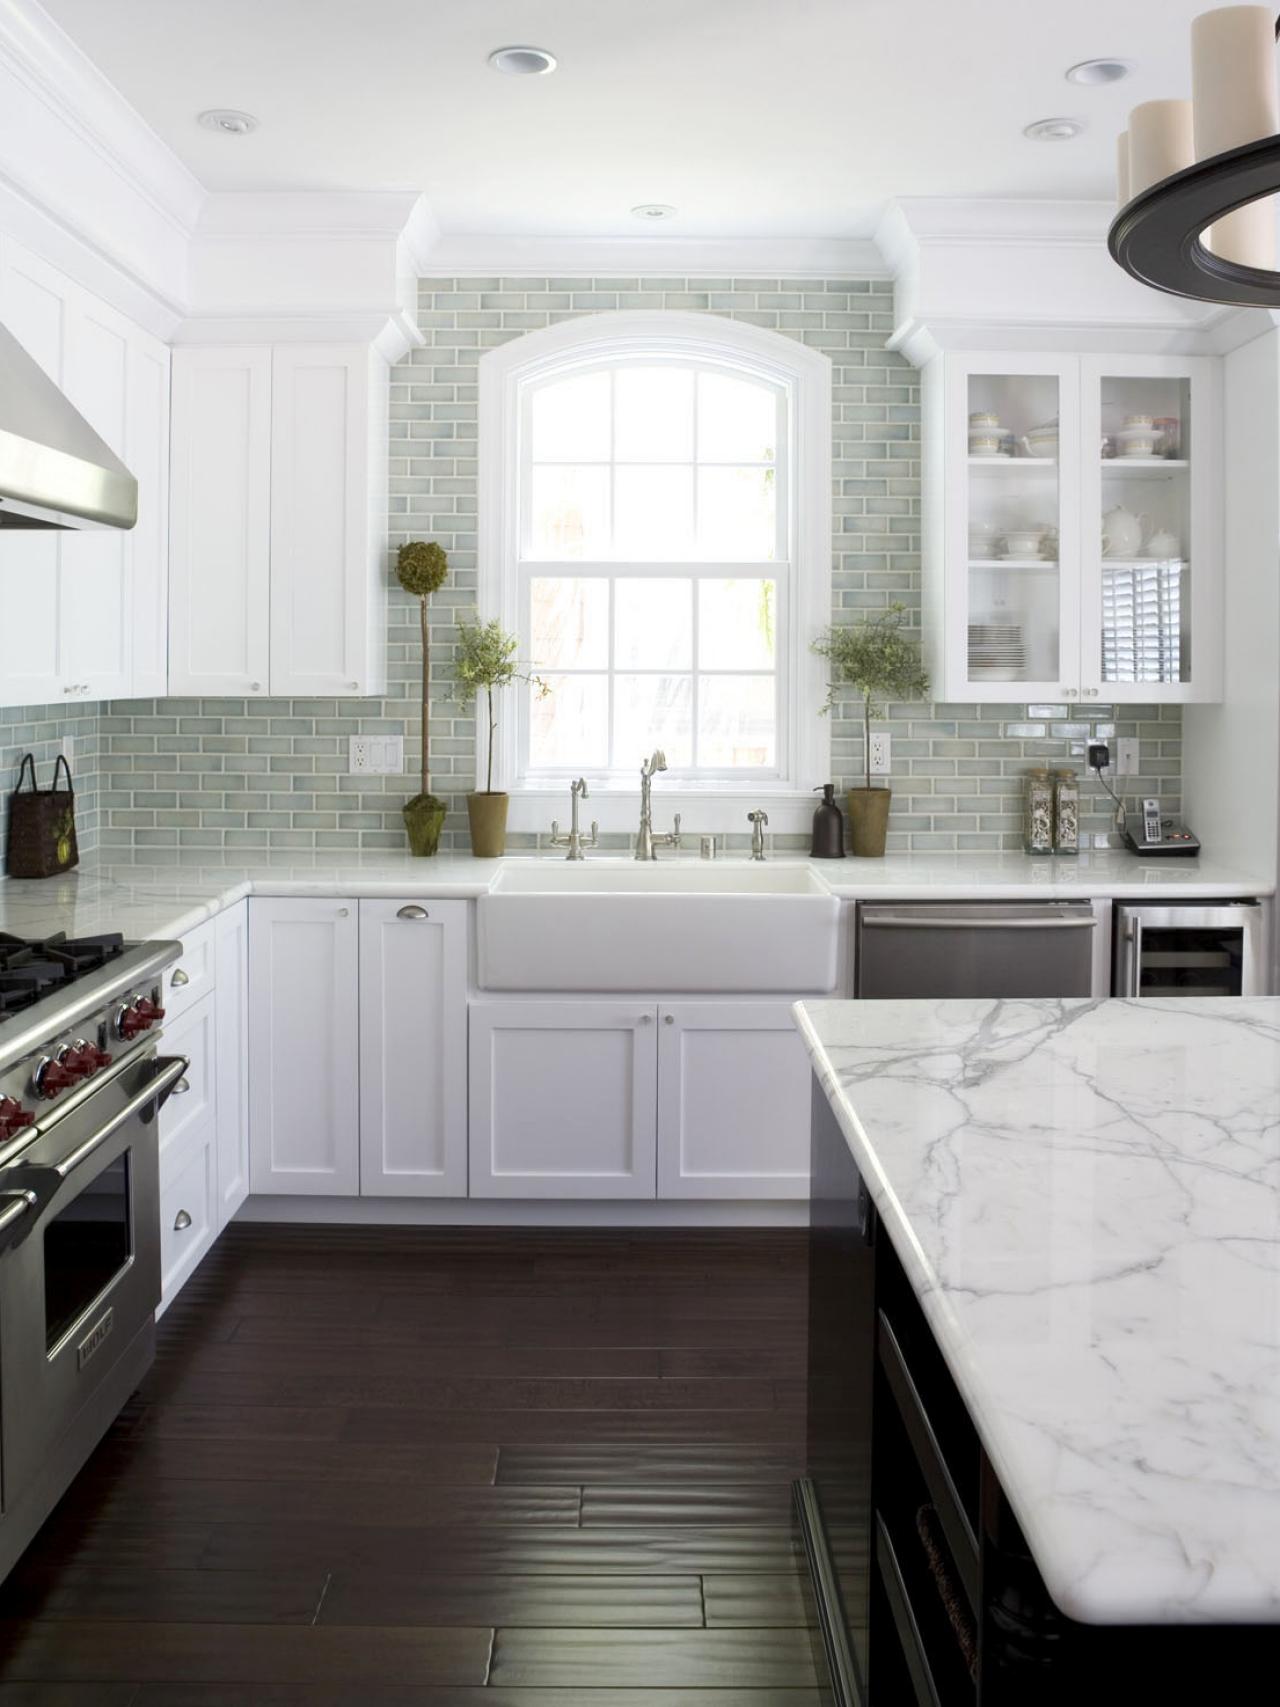 Marble Countertops Kitchen Absorbing Marble Countertops For White Kitchen Ideas With Tiles For Backsplash To Complete Traditional Kitchen Concept Kitchen White Kitchen Ideas Ideal For Traditional And Modern Designs